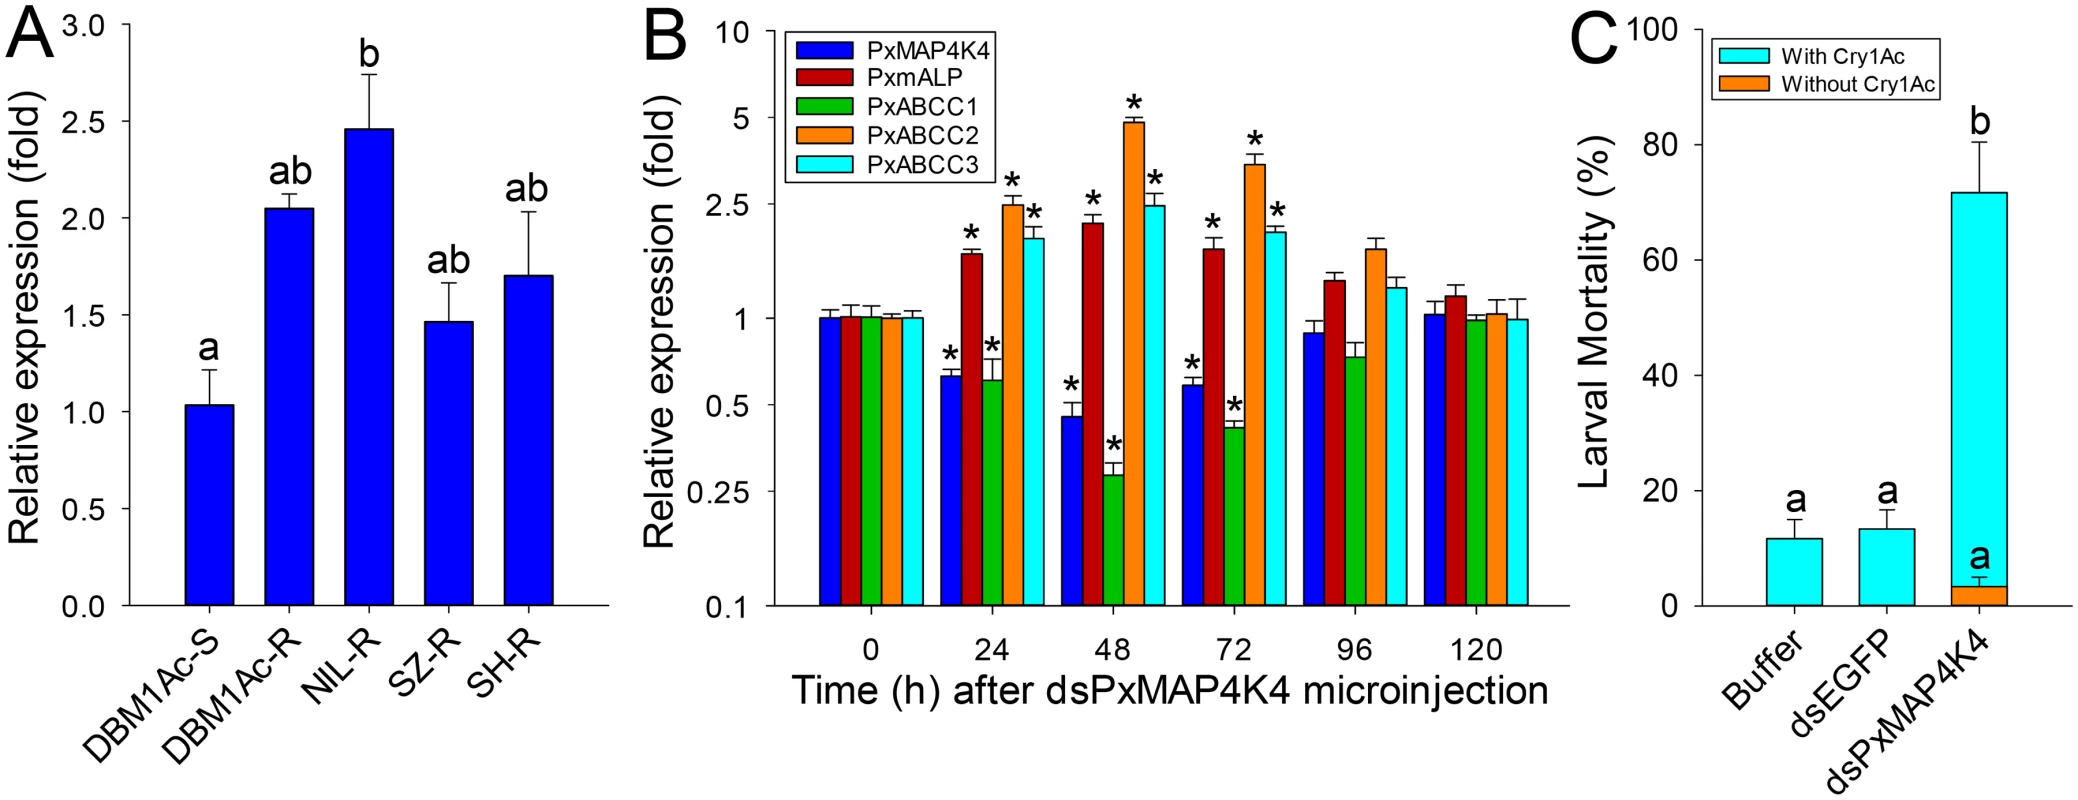 Detection of <i>PxMAP4K4</i> gene expression and effect of its silencing on expression of <i>PxmALP</i> and PxABCC genes and susceptibility to Cry1Ac.